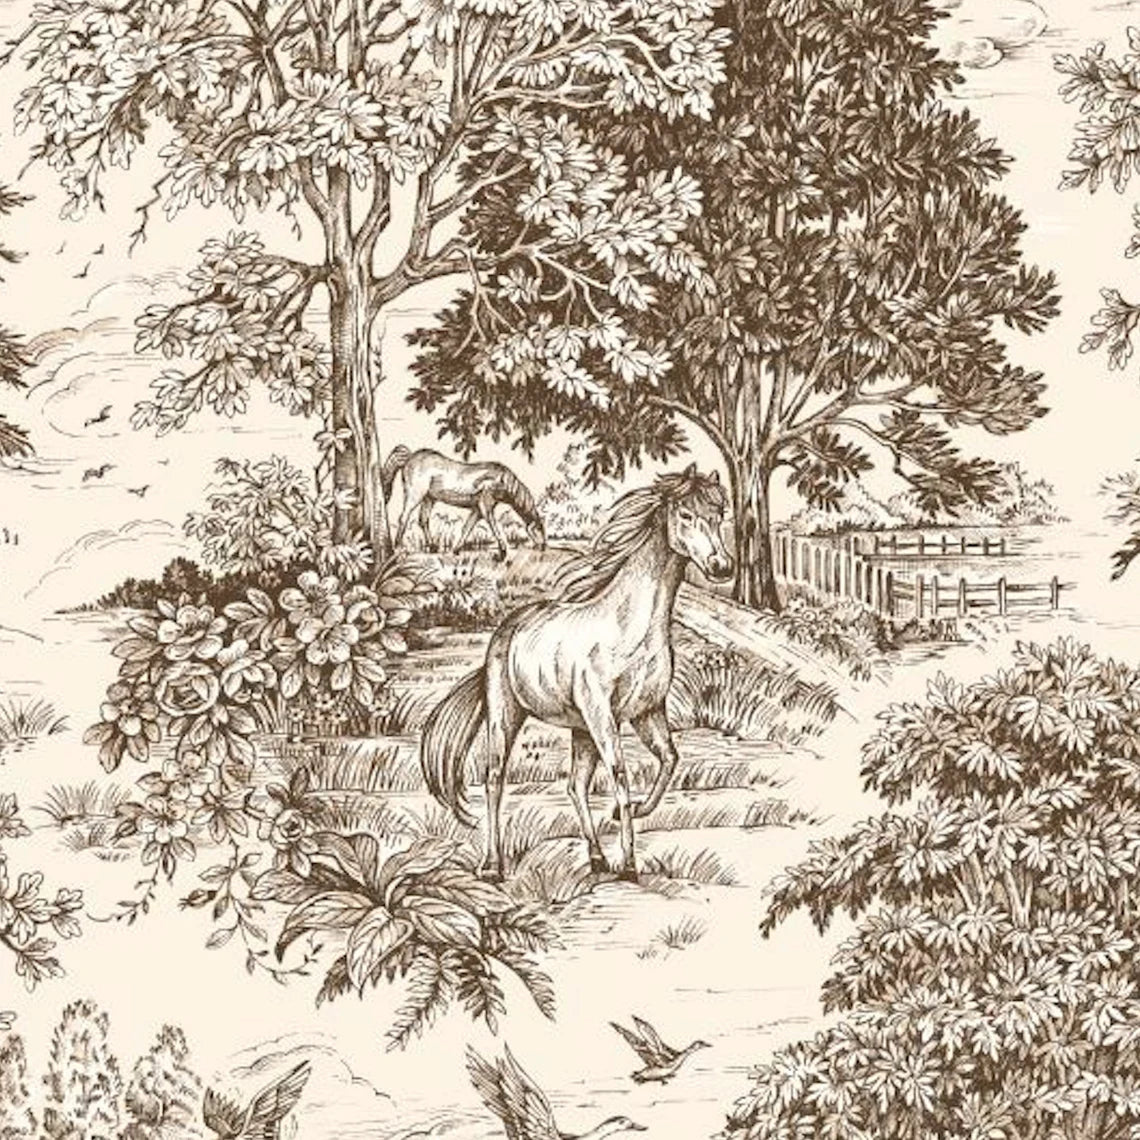 pillow sham in Yellowstone Driftwood Brown Country Toile- Horses, Deer, Dogs- Large Scale